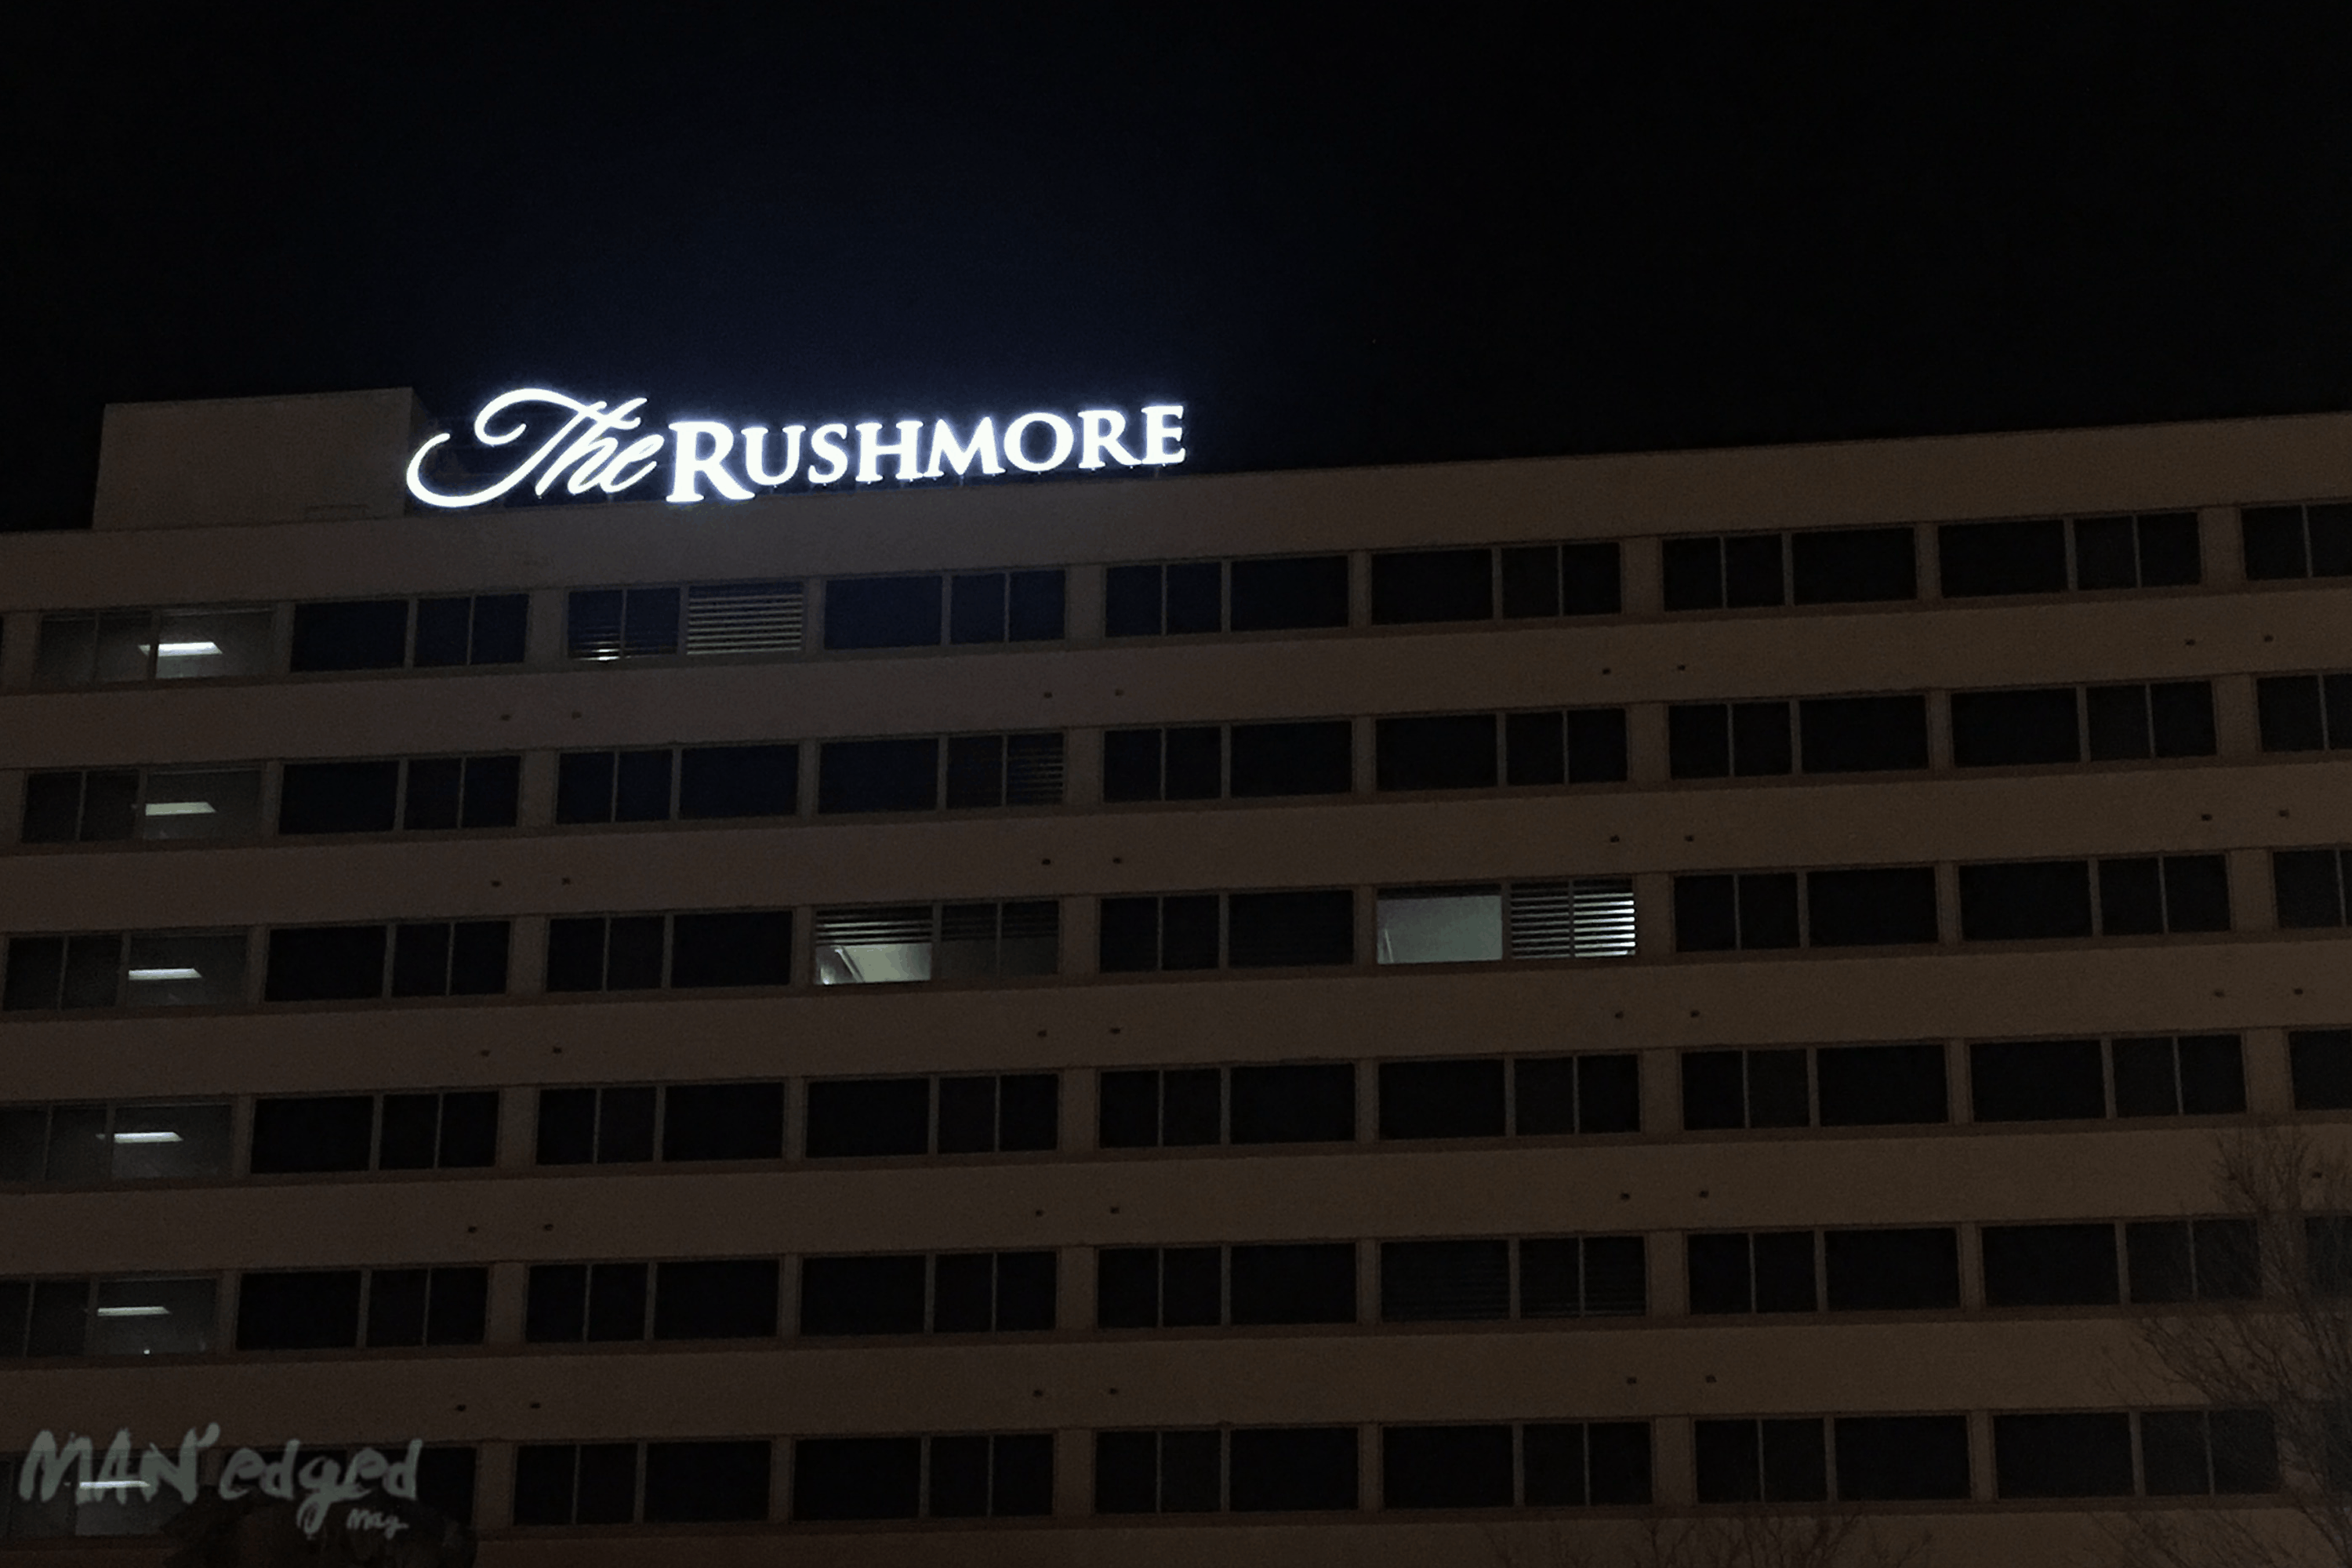 The Rushmore Hotel and Suites building.